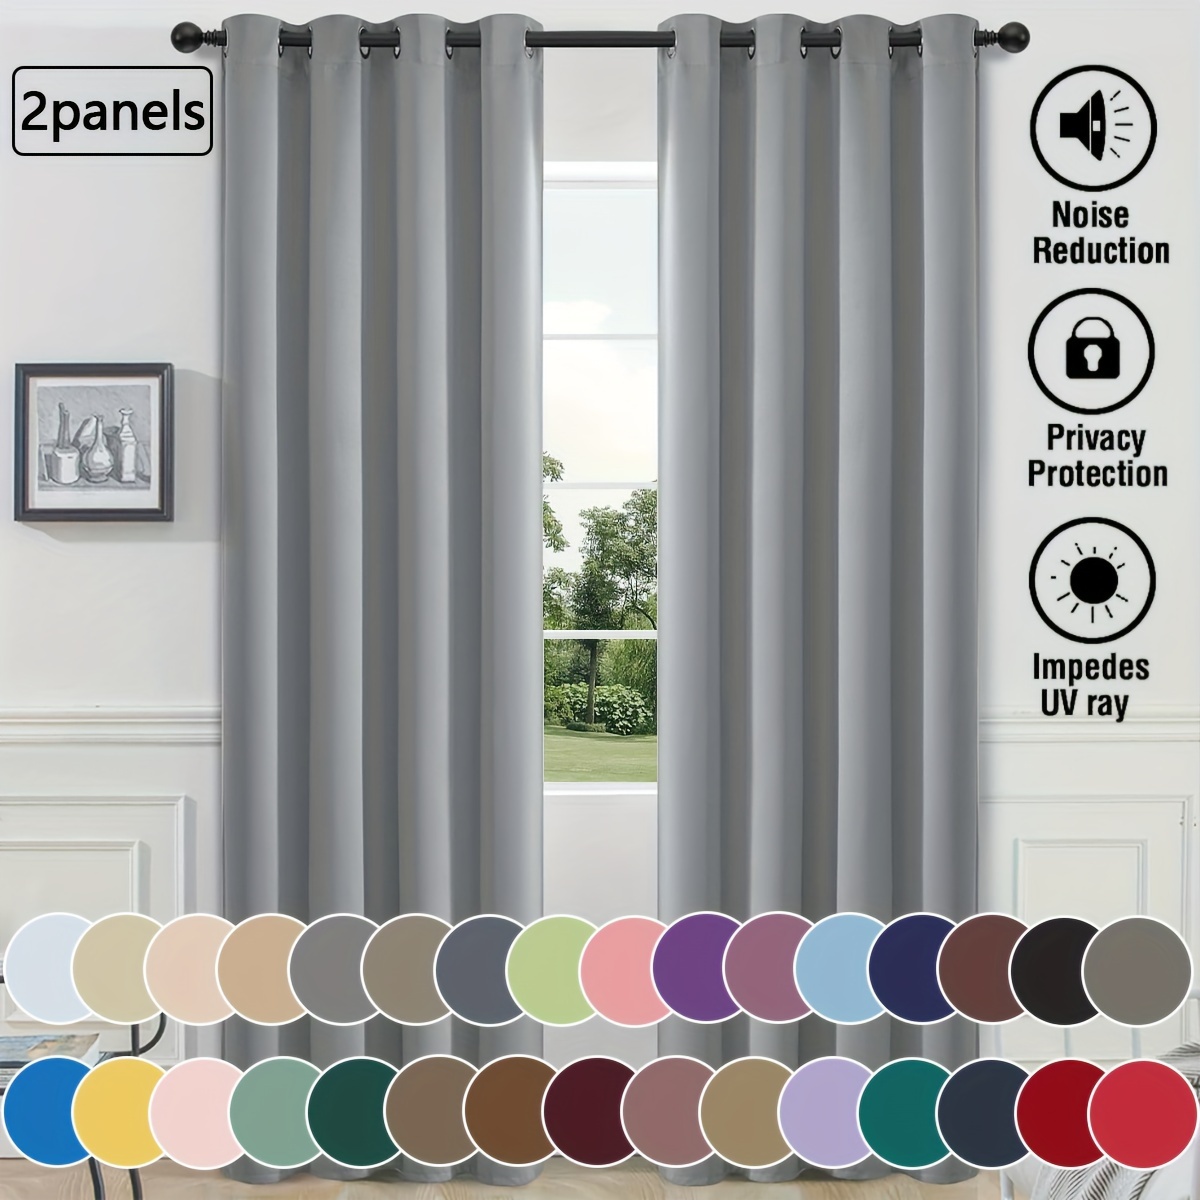 

2pcs High Blackout Solid Color Curtains, Simple And Modern Solid Color Curtains Suitable For Bedroom, Living Room, Kitchen, Study, Office, And Home Decoration